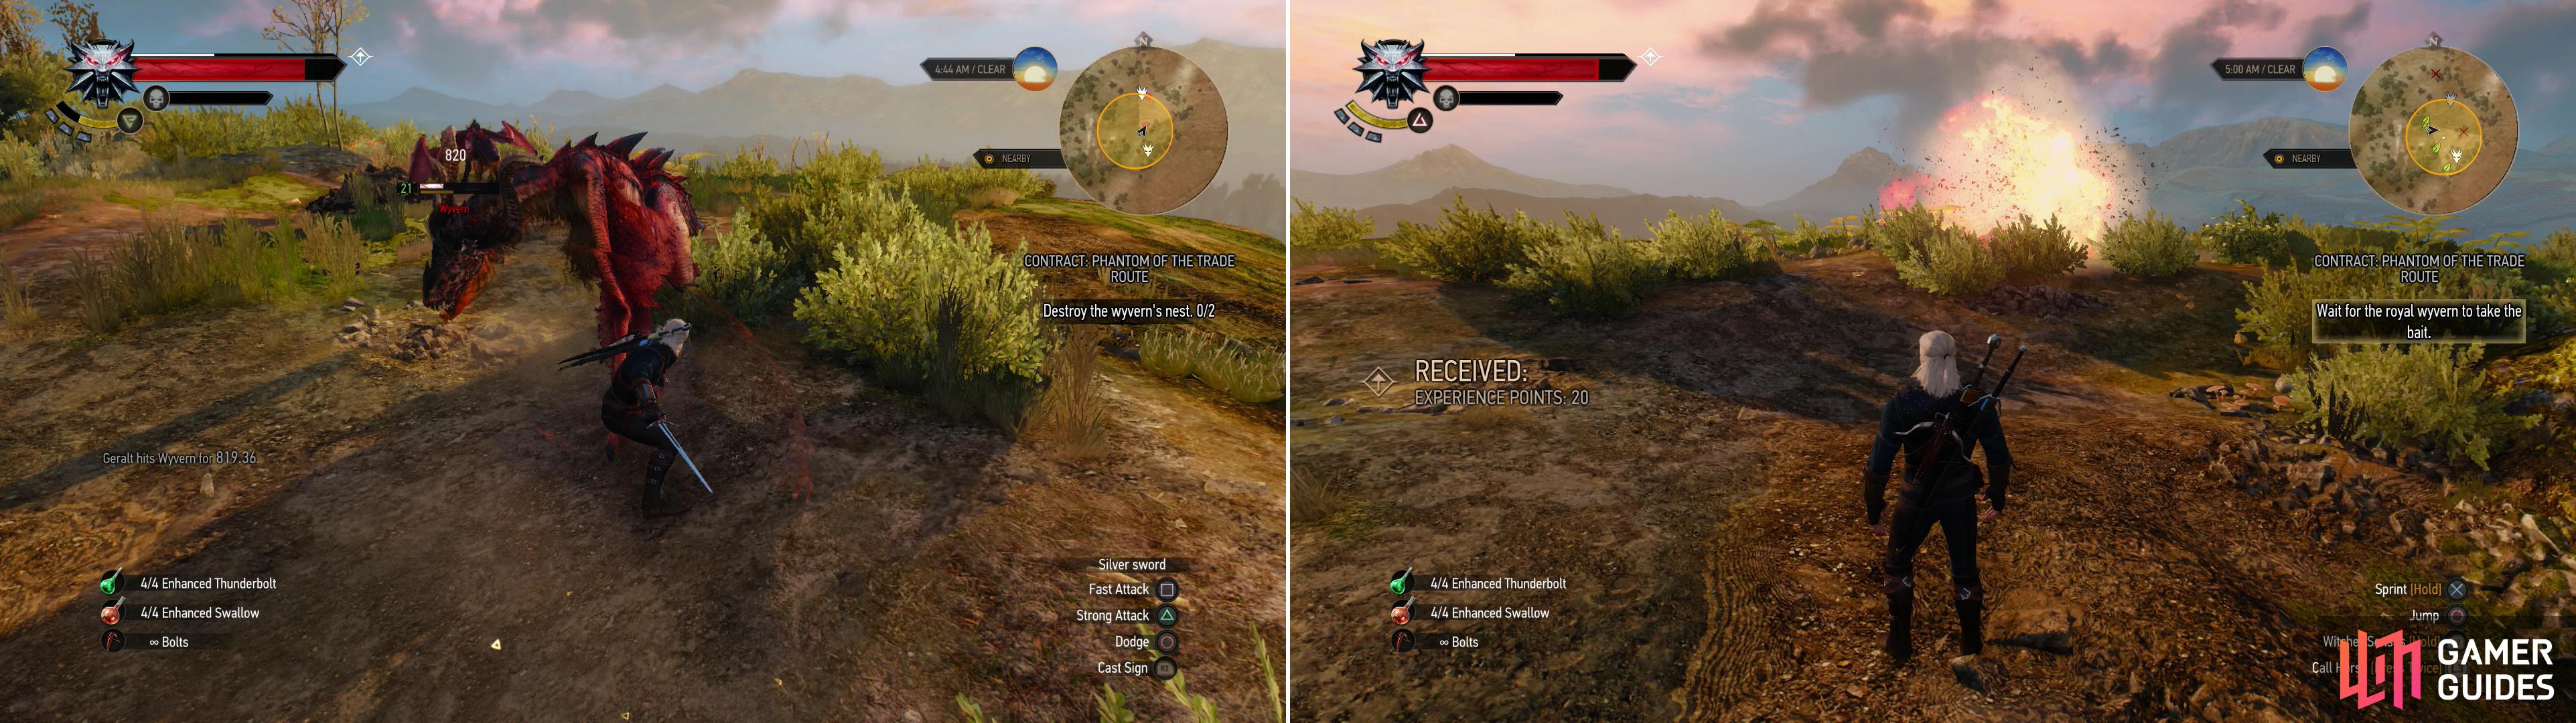 Fight off two Wyverns (left) and destroy their nests (right).